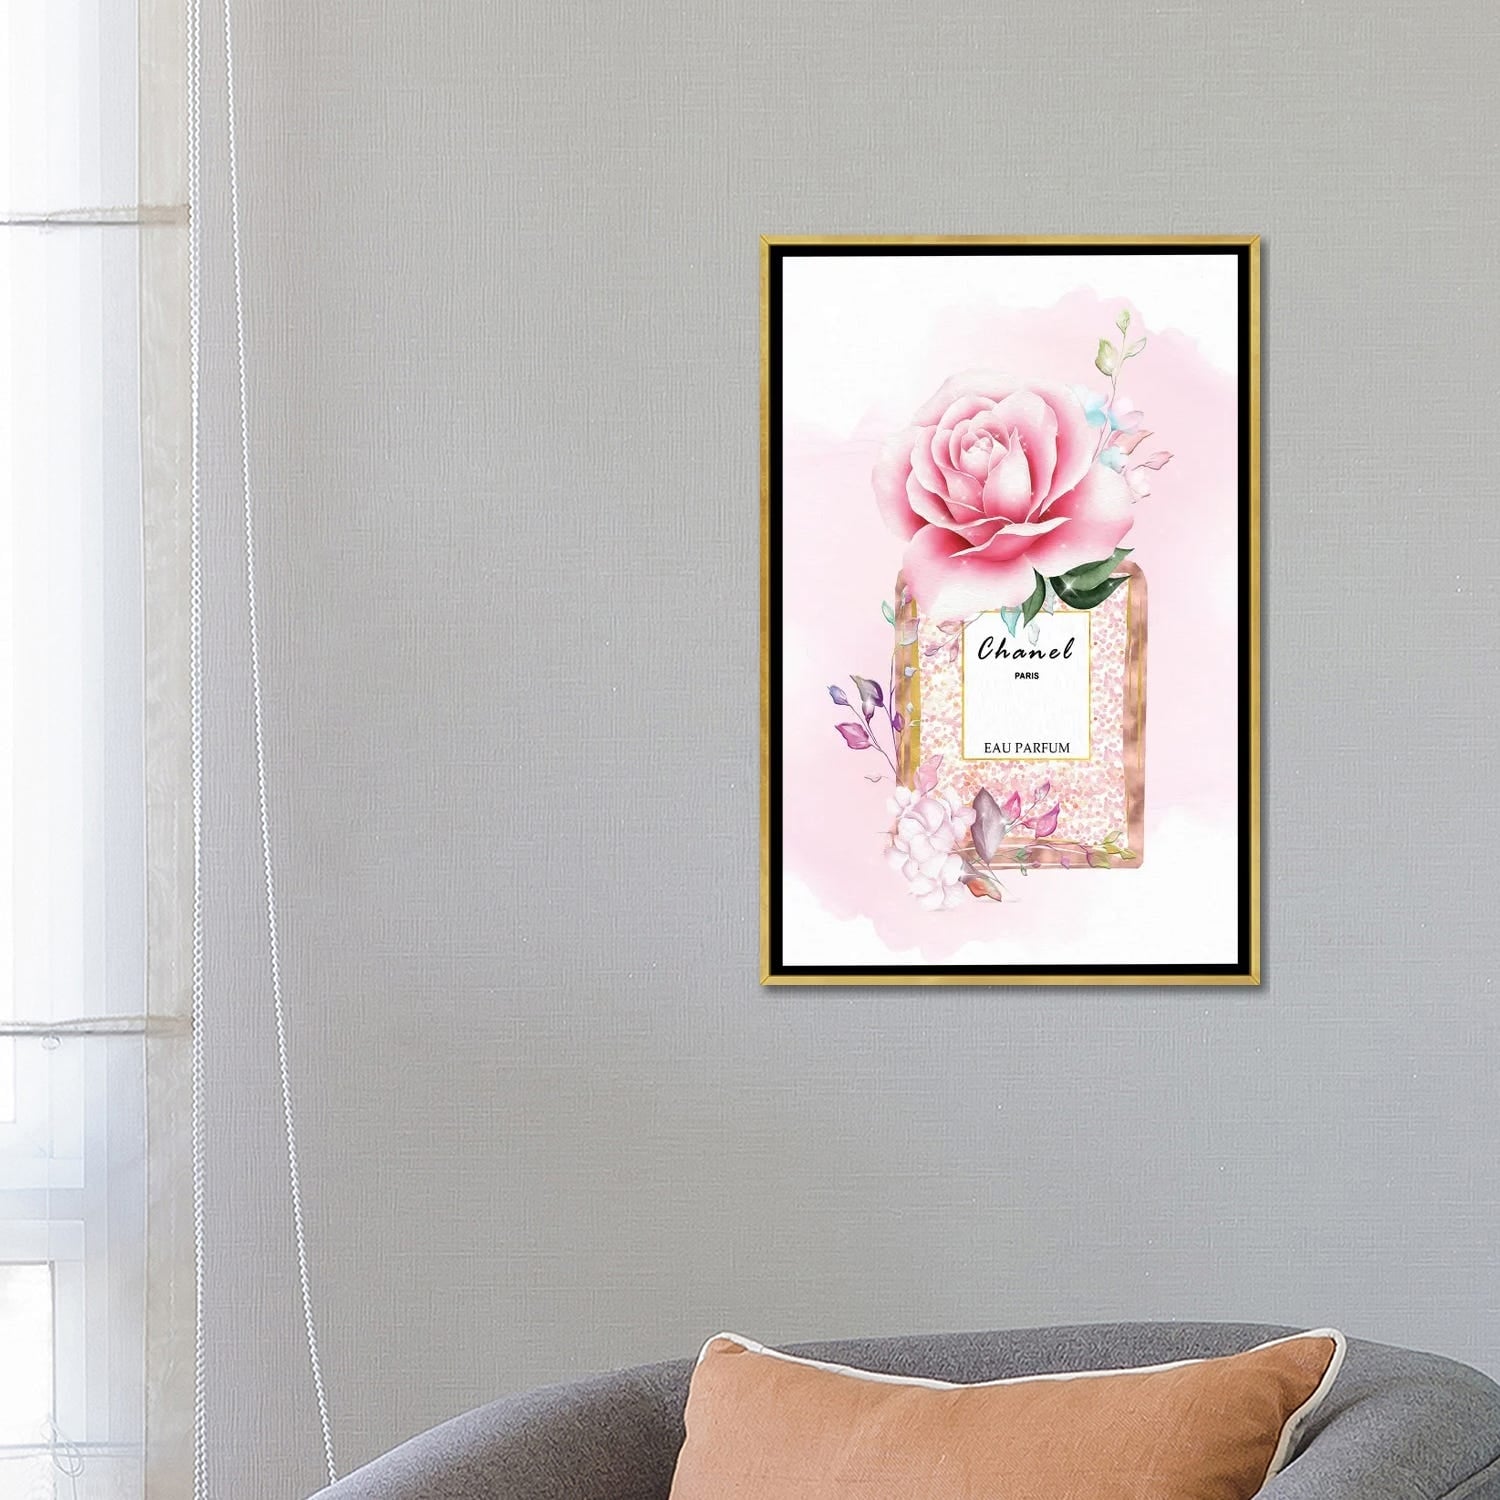 iCanvas Rose Gold Perfume Bottle With Pink Blush Florals by Pomaikai  Barron Framed Canvas Print - Bed Bath & Beyond - 36869717